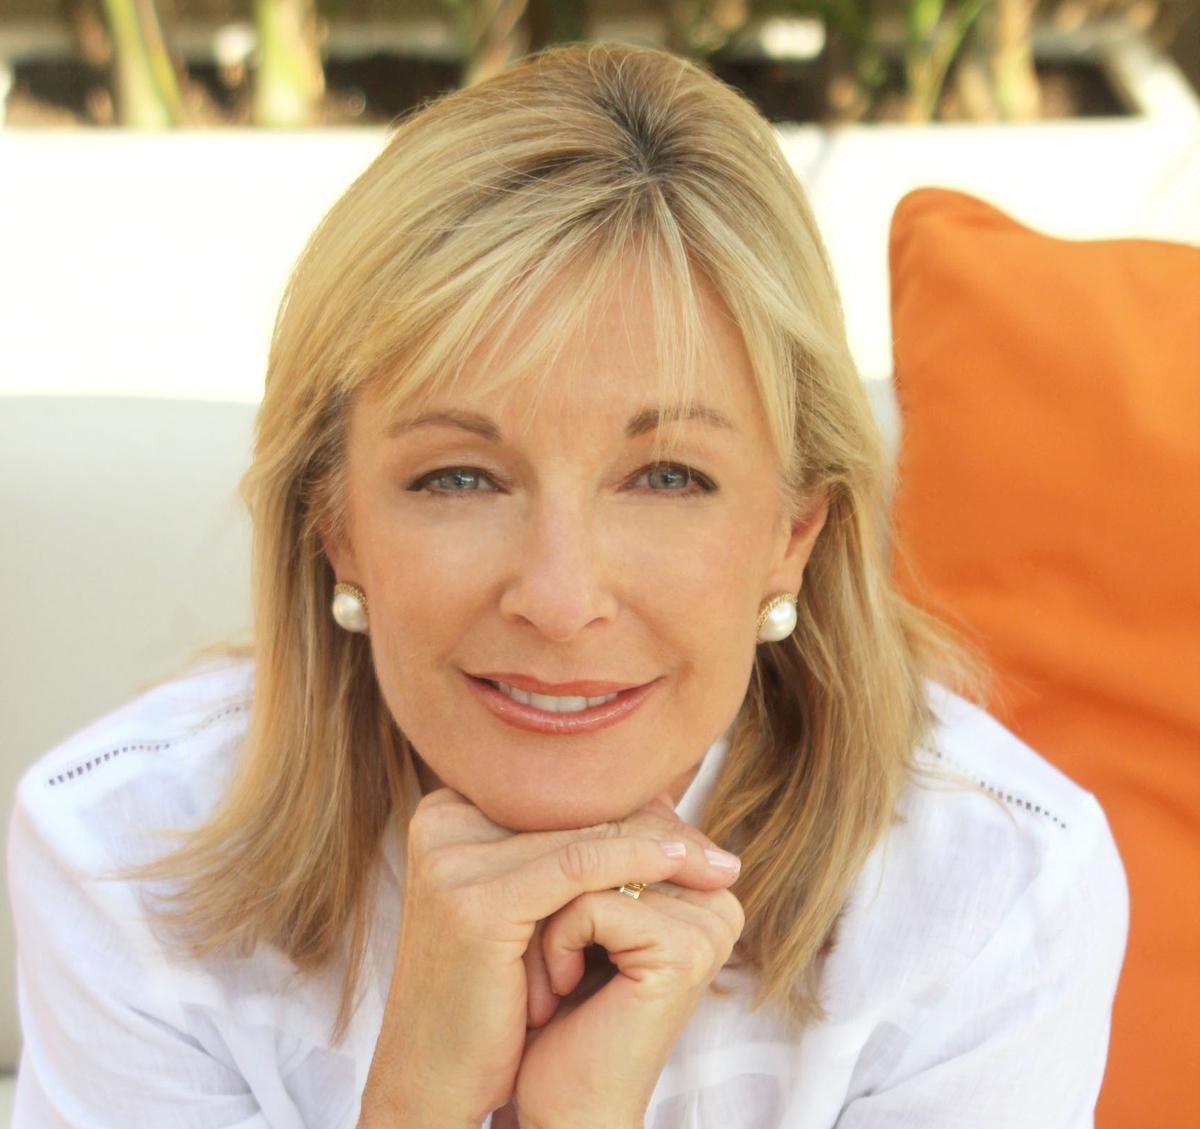 Susie Ellis, president and CEO of the Global Wellness Summit / 